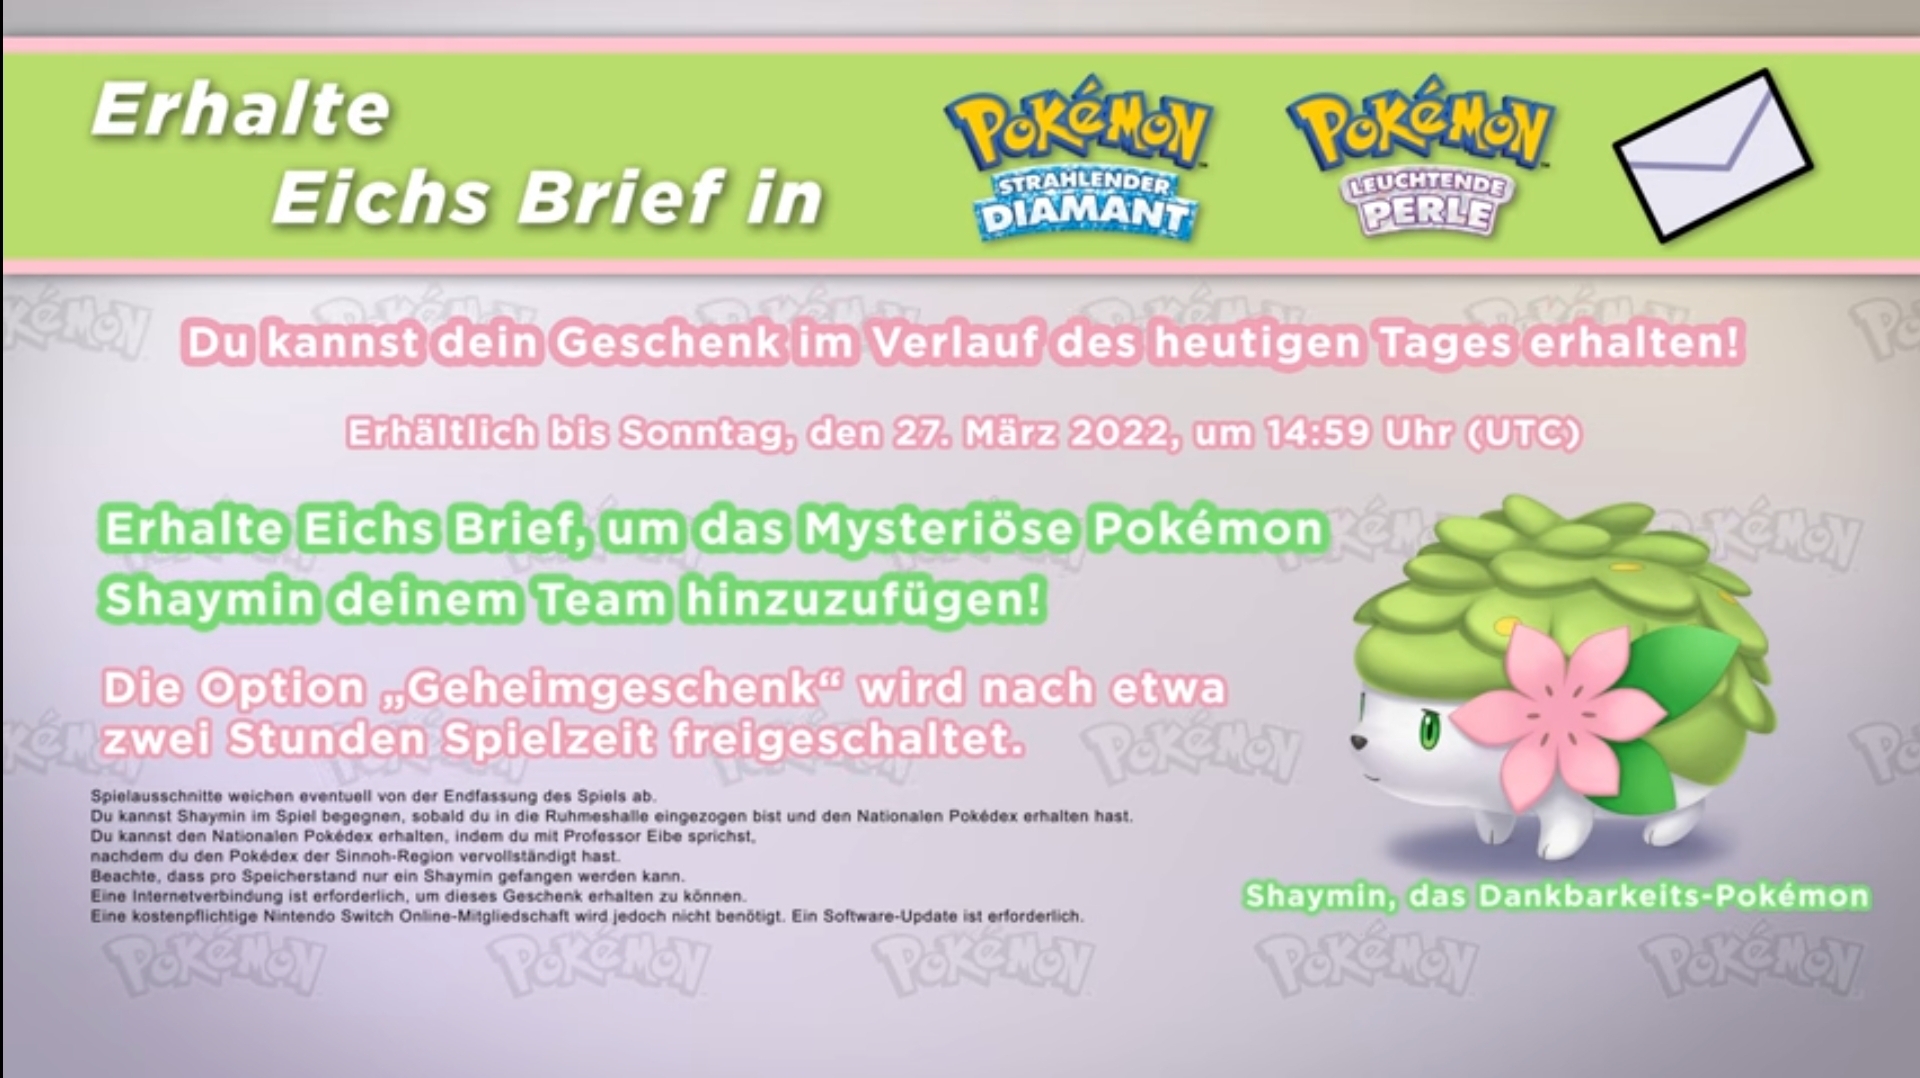 Image: Shaymin Event in BDSP